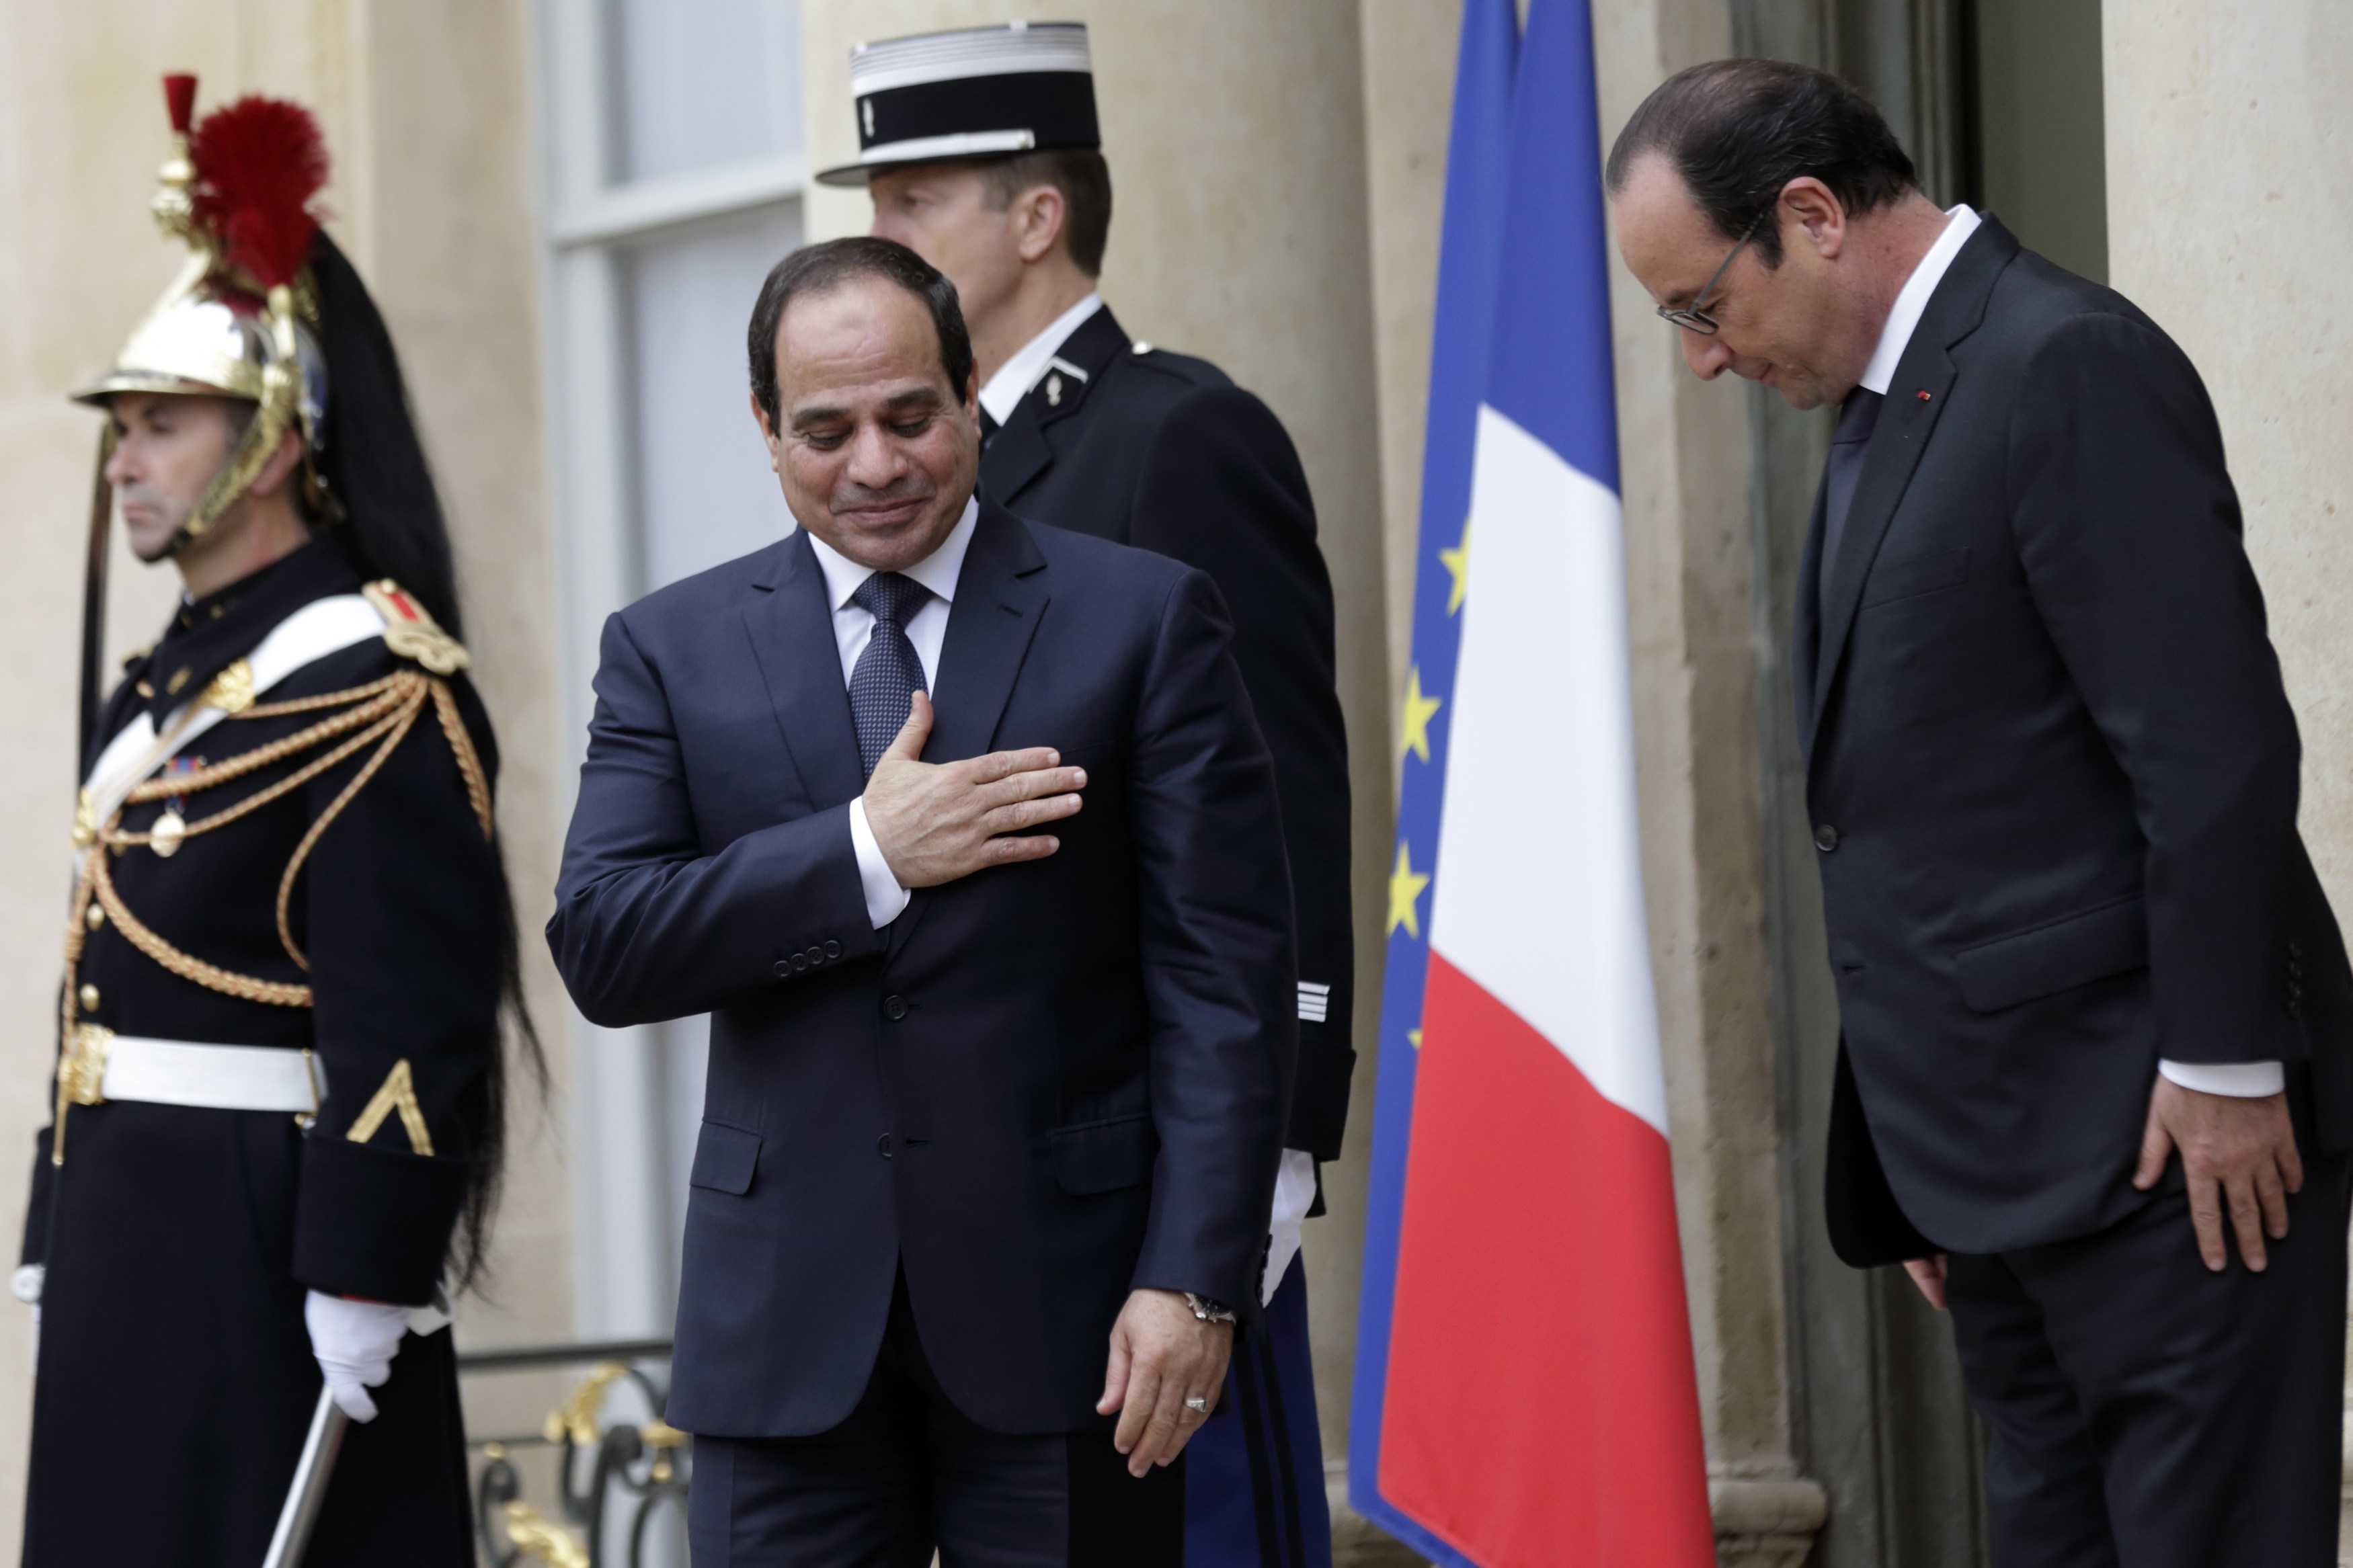 France's Hollande says Egypt to order 24 Rafale jets and frigate